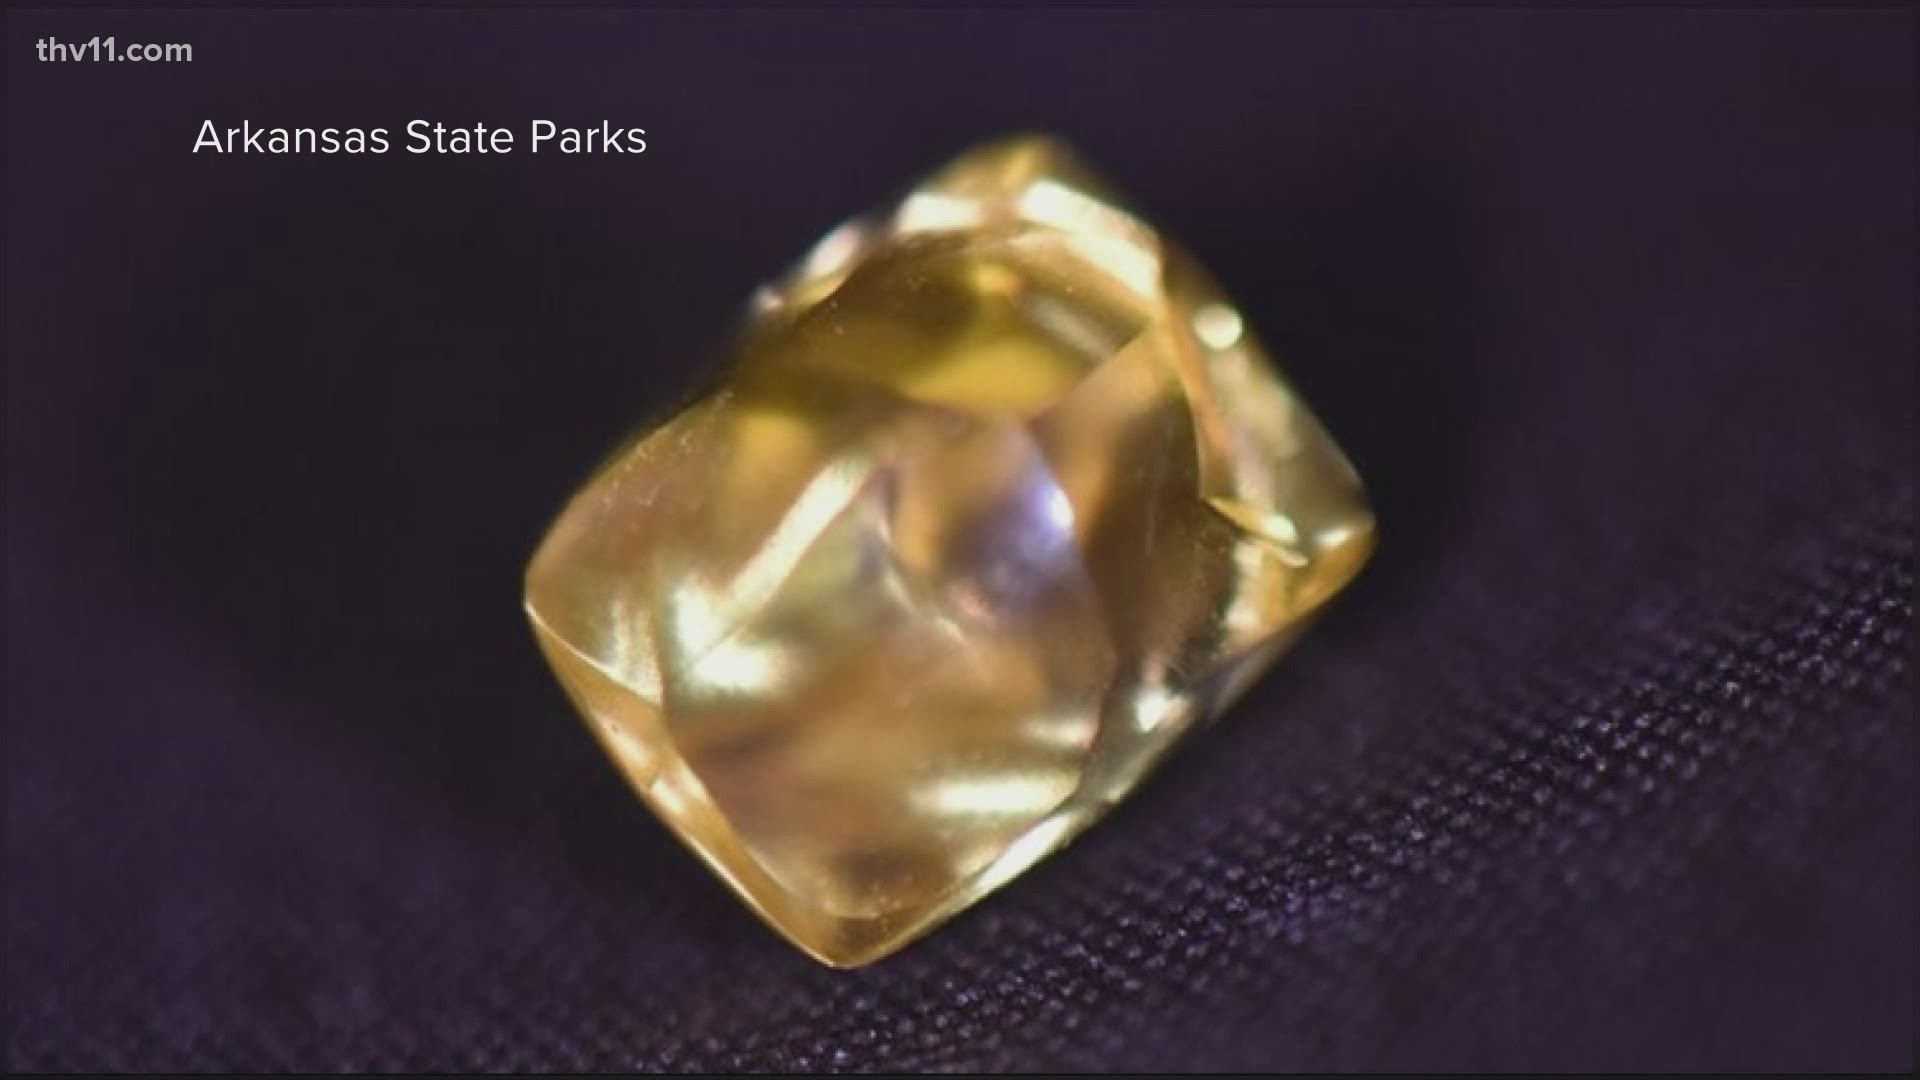 Steven McCool of Fayetteville, Ark. visited Crater of Diamonds State Park and found a 4.49-carat diamond.